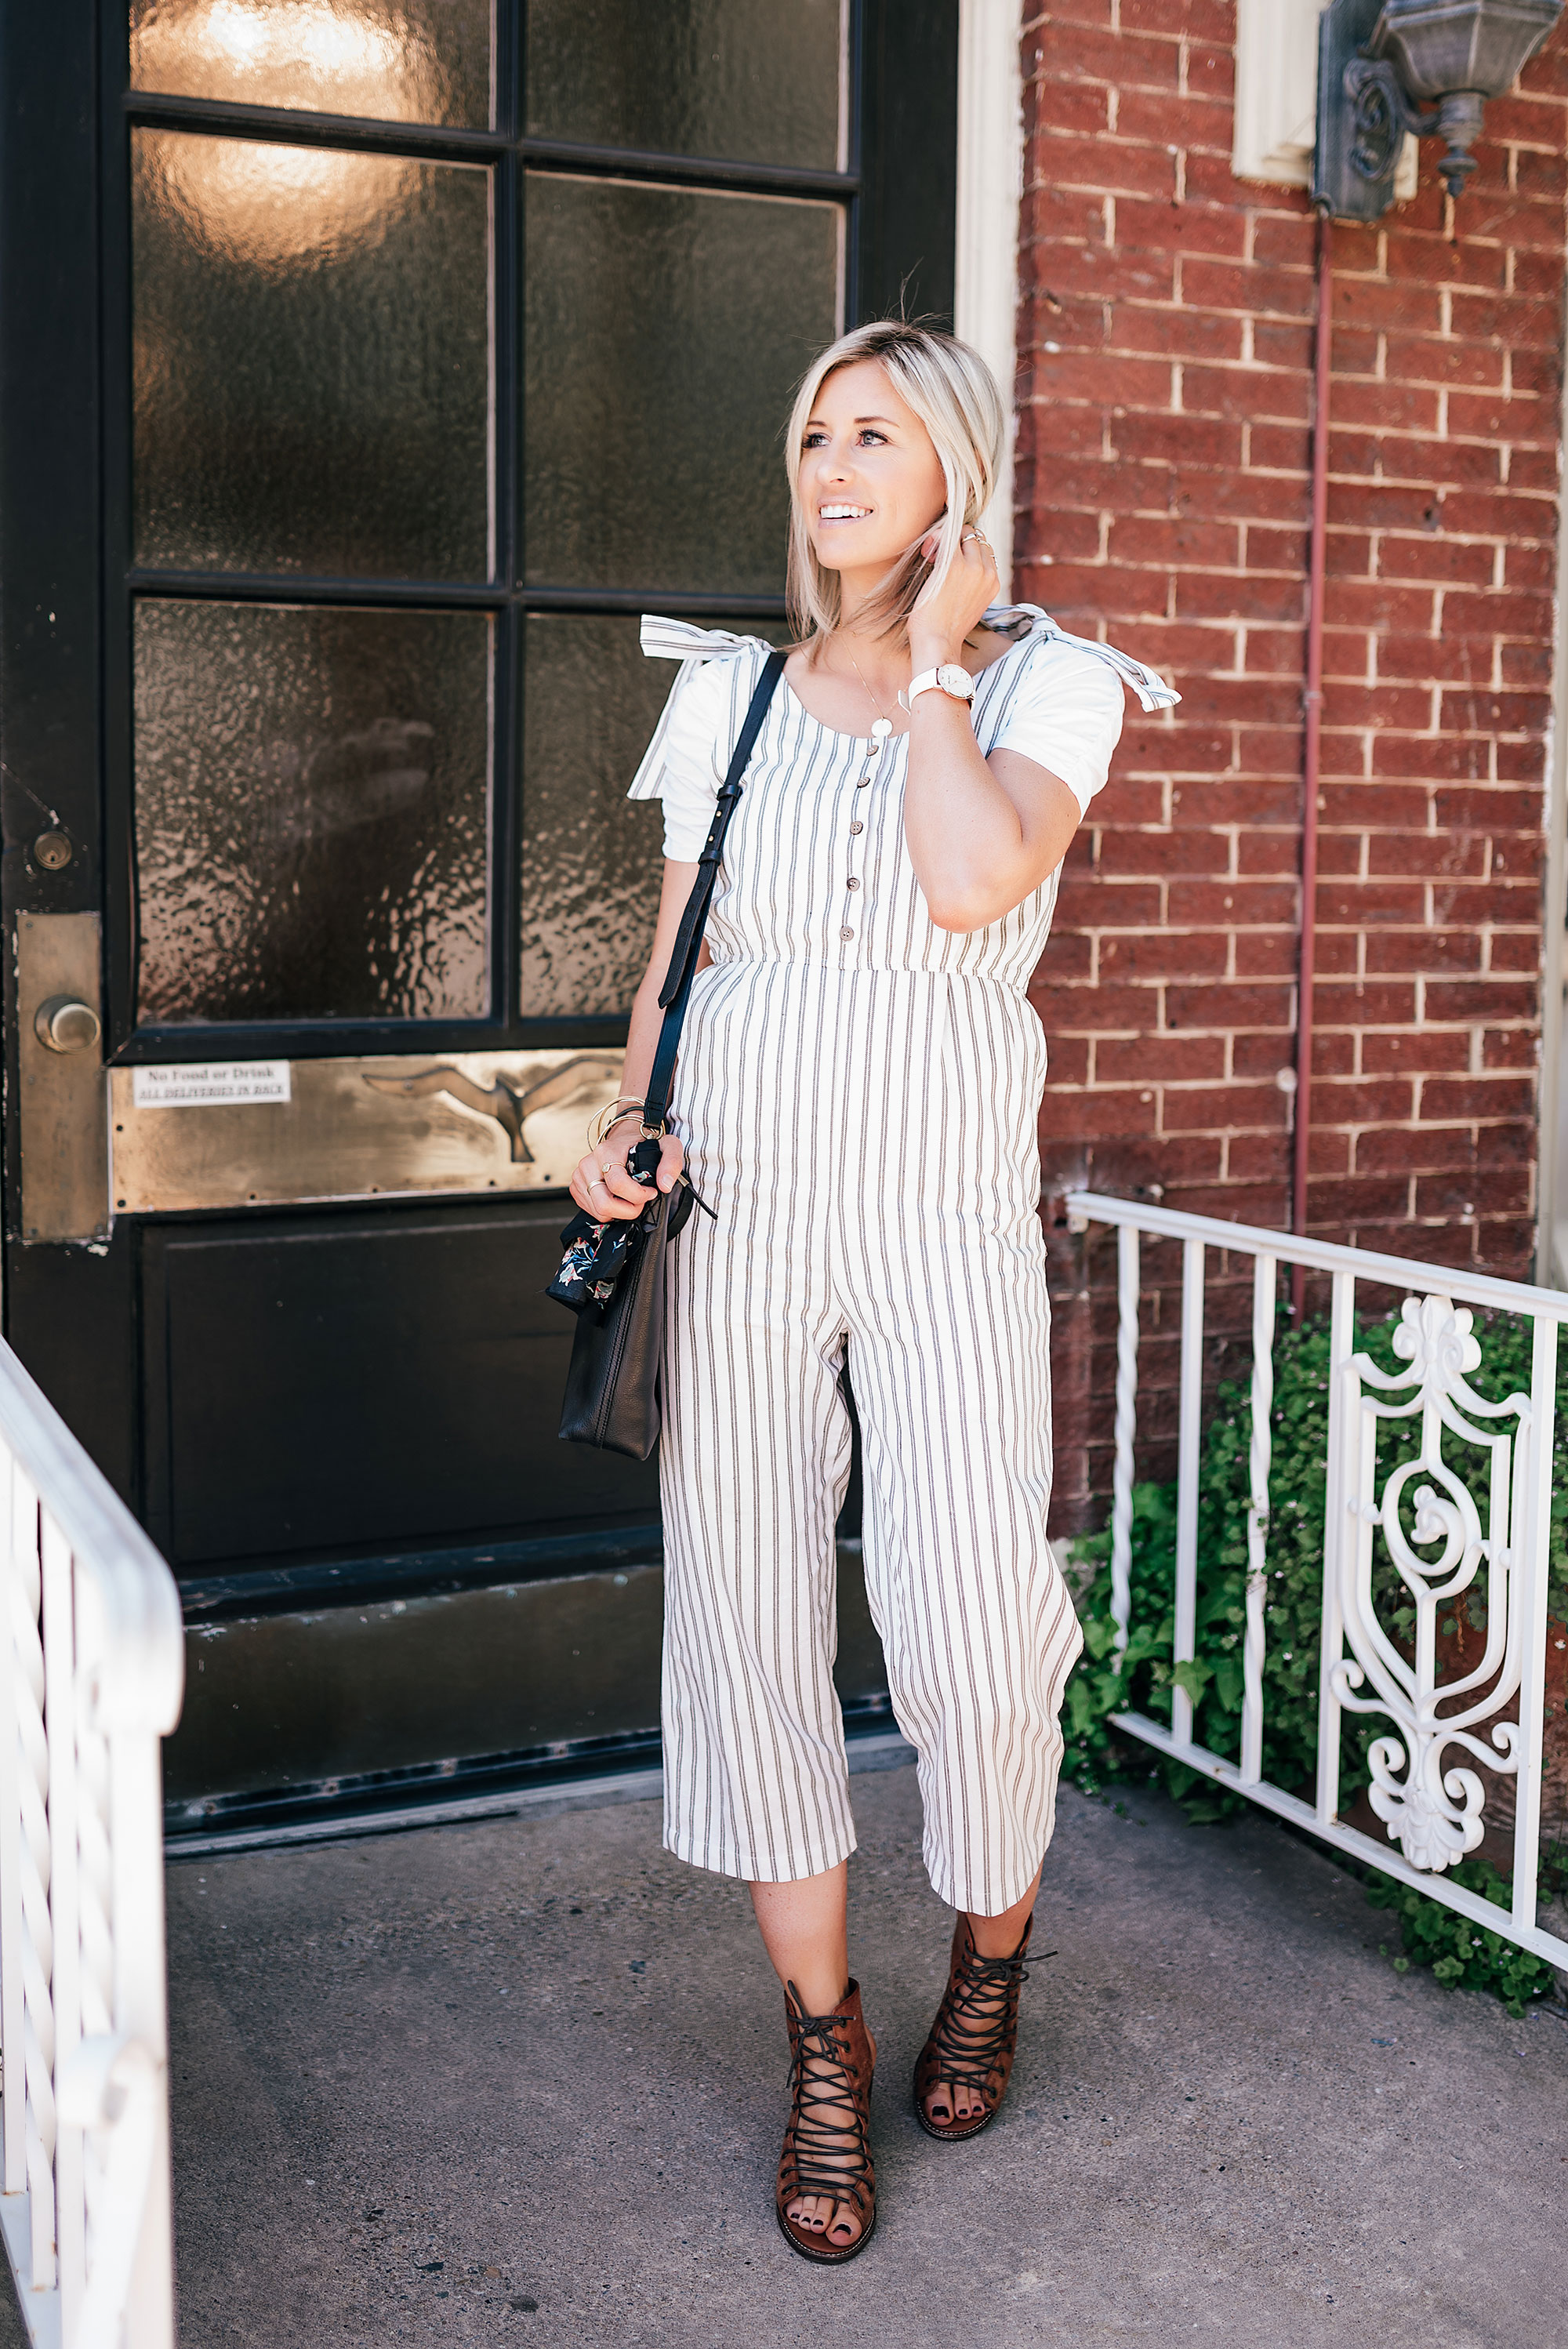 The Jumpsuit Trend: Why You Need One and How to Wear it | Little Miss Fearless